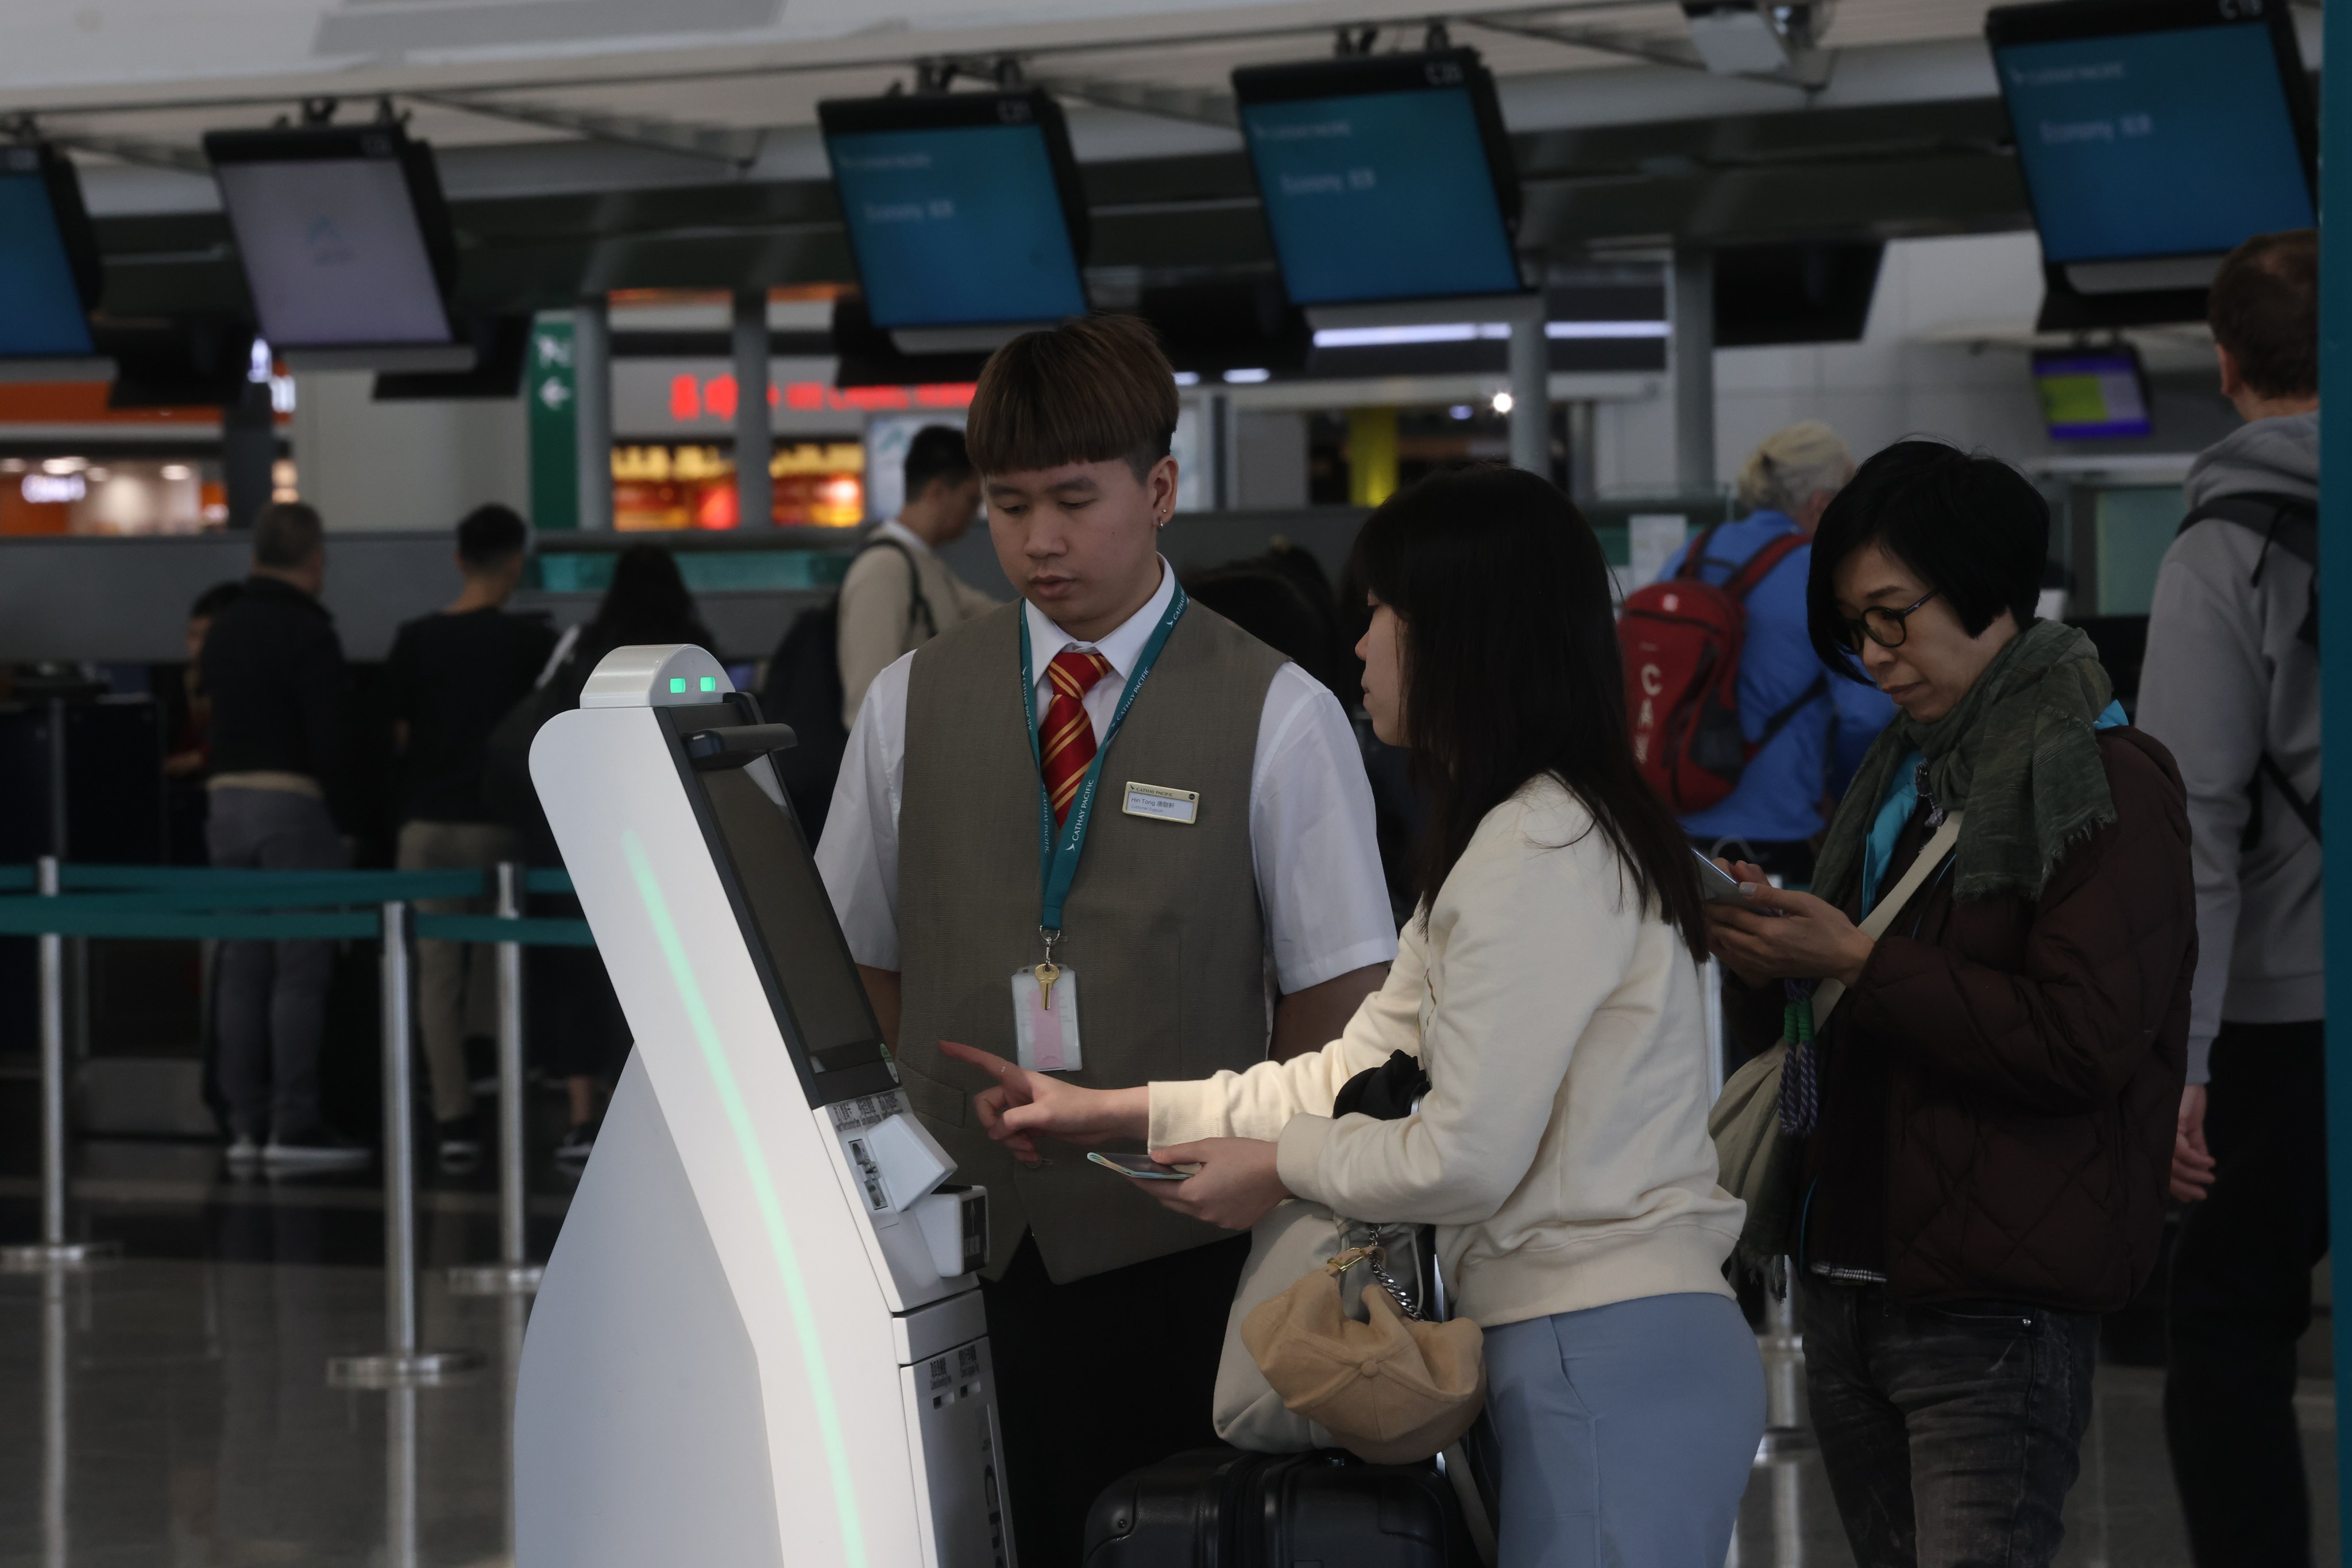 A Cathay Pacific staff member helps passengers check in for their flights at a kiosk at Hong Kong International Airport on January 12. Cathay passengers have expressed frustration with the airline after a series of flight cancellations that the airline blamed on a lack of staffing because of an influenza outbreak. Photo: Jonathan Wong